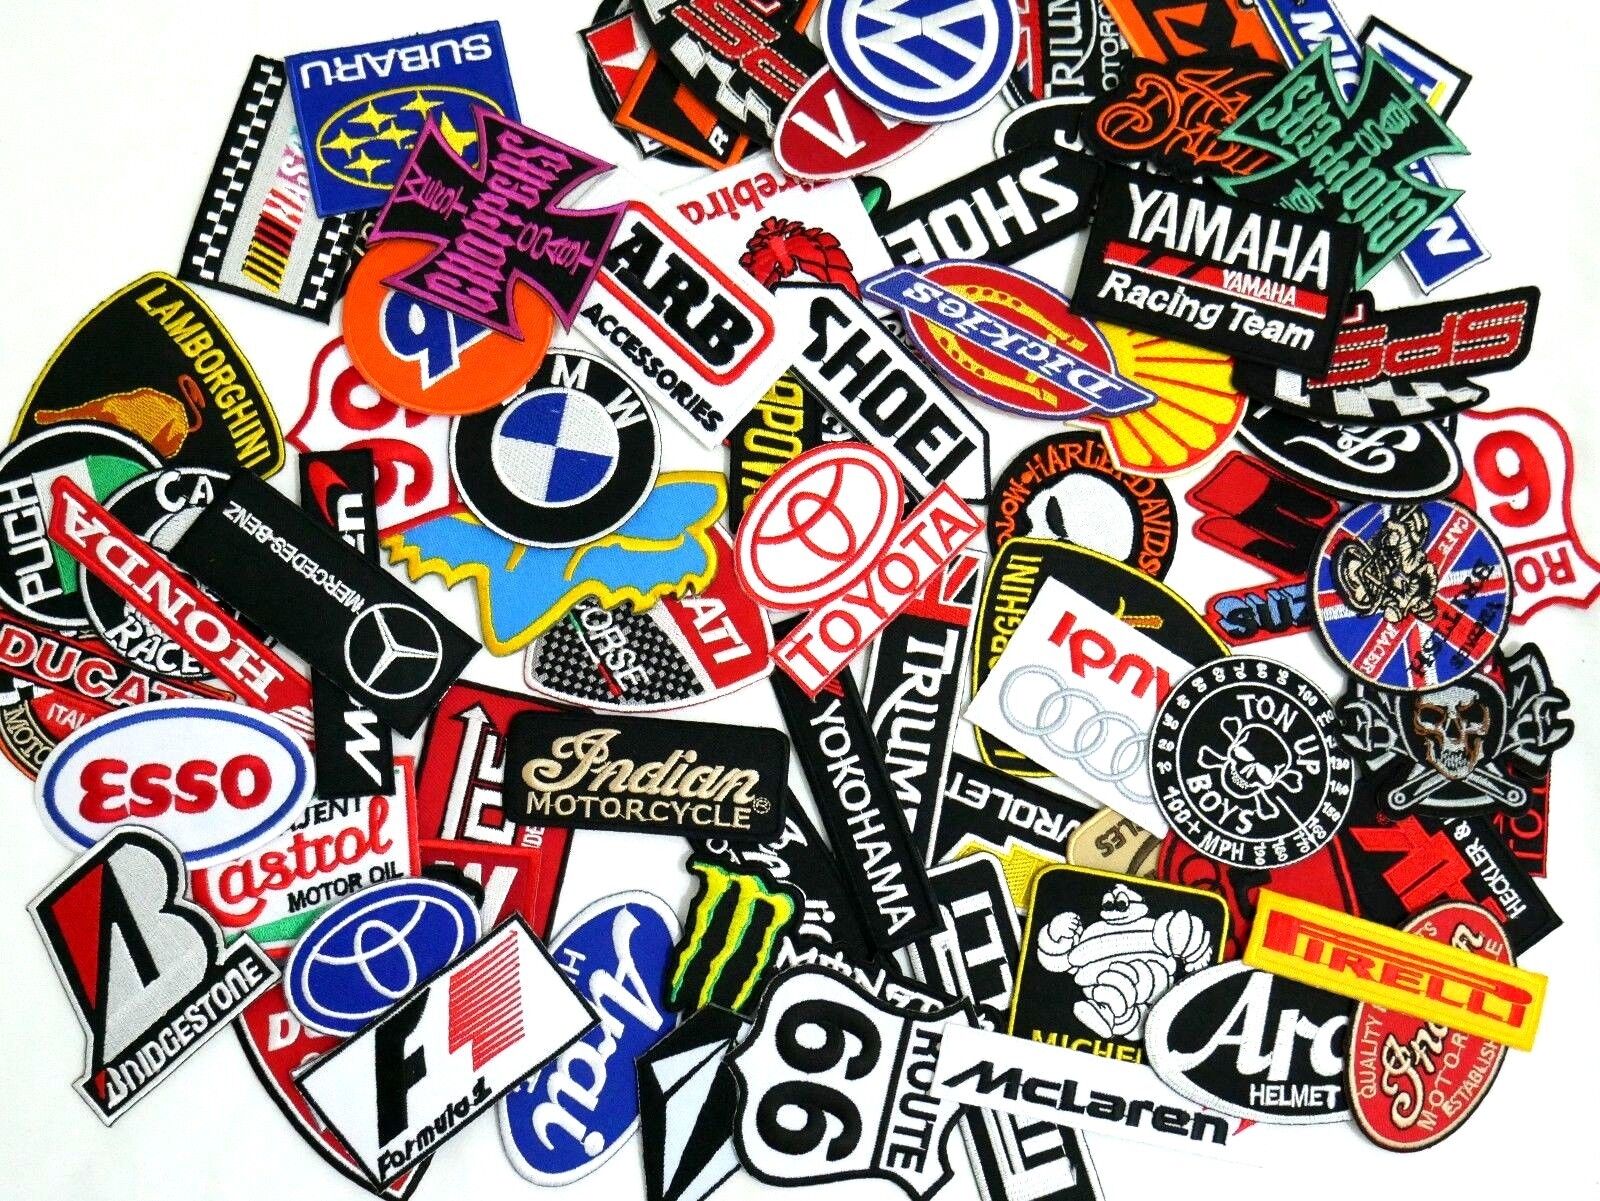 Mix Random Lot of 30 Racing Sport Motorsport Embroidered Sew Iron On Patch Biker Unbranded Does Not Apply